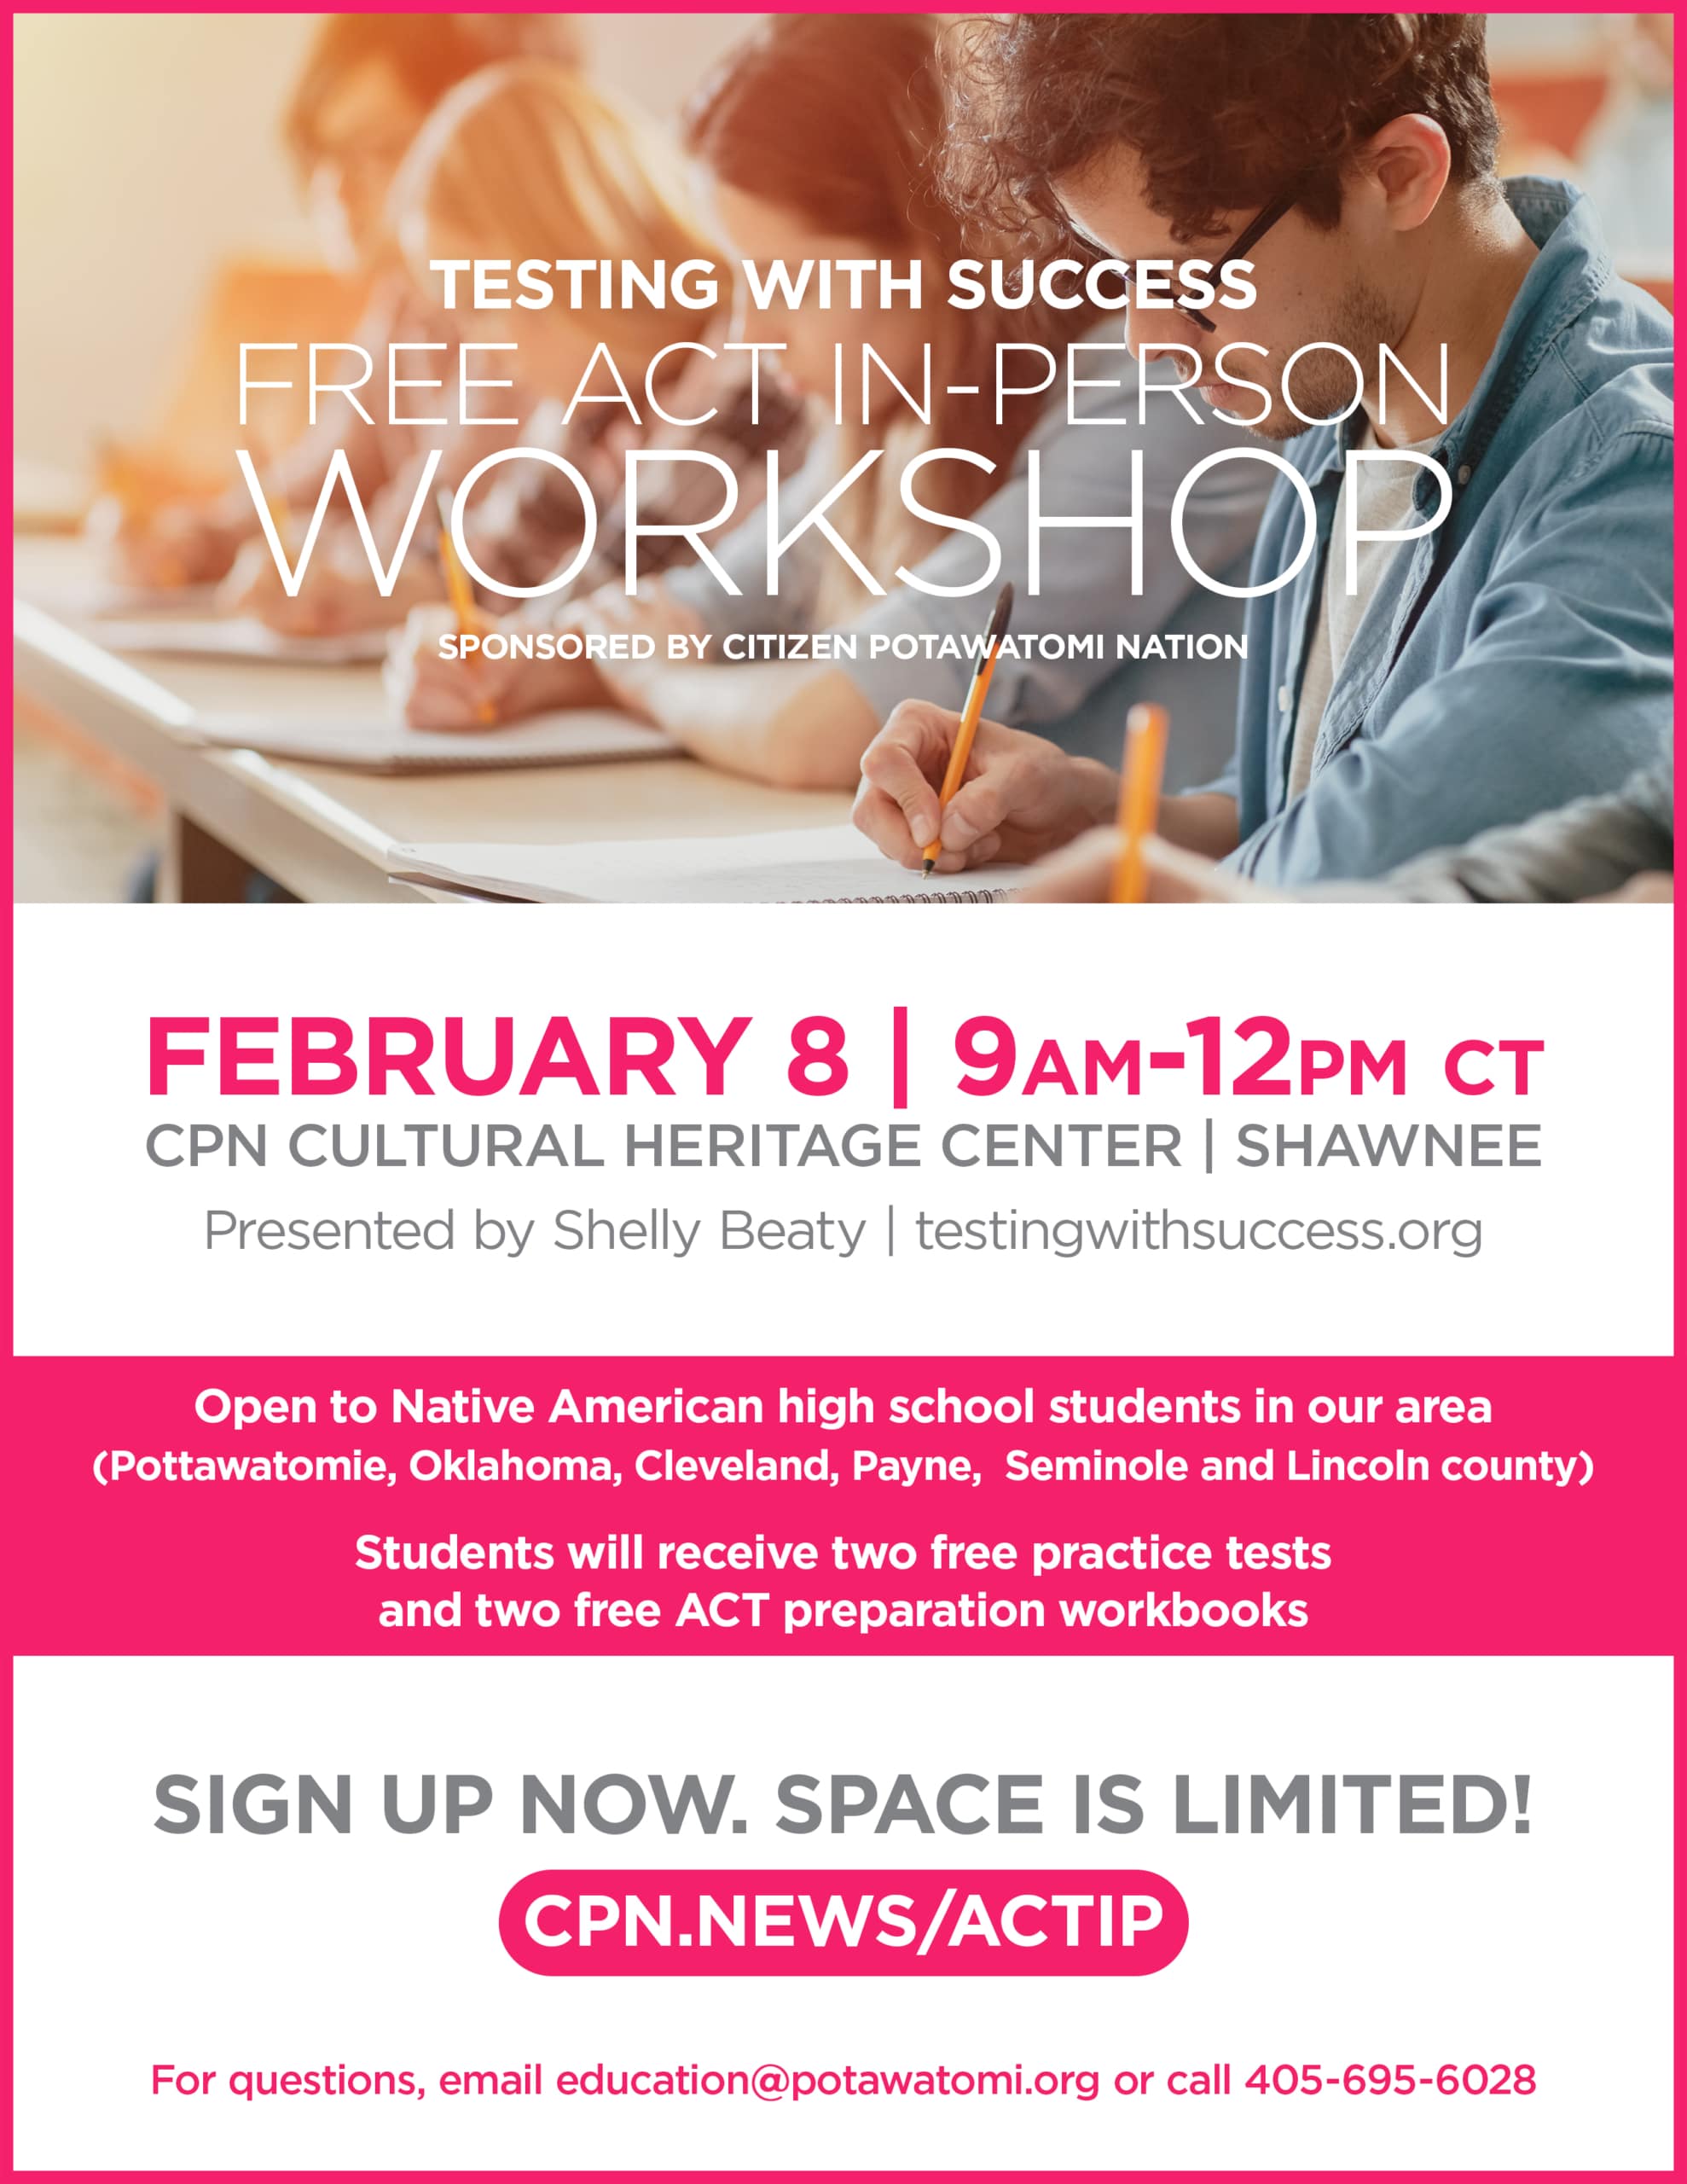 Pink flyer with a stock photo of students taking a test advertises the free ACT workshop for Native American students in the Citizen Potawatomi Nation area on February 8.